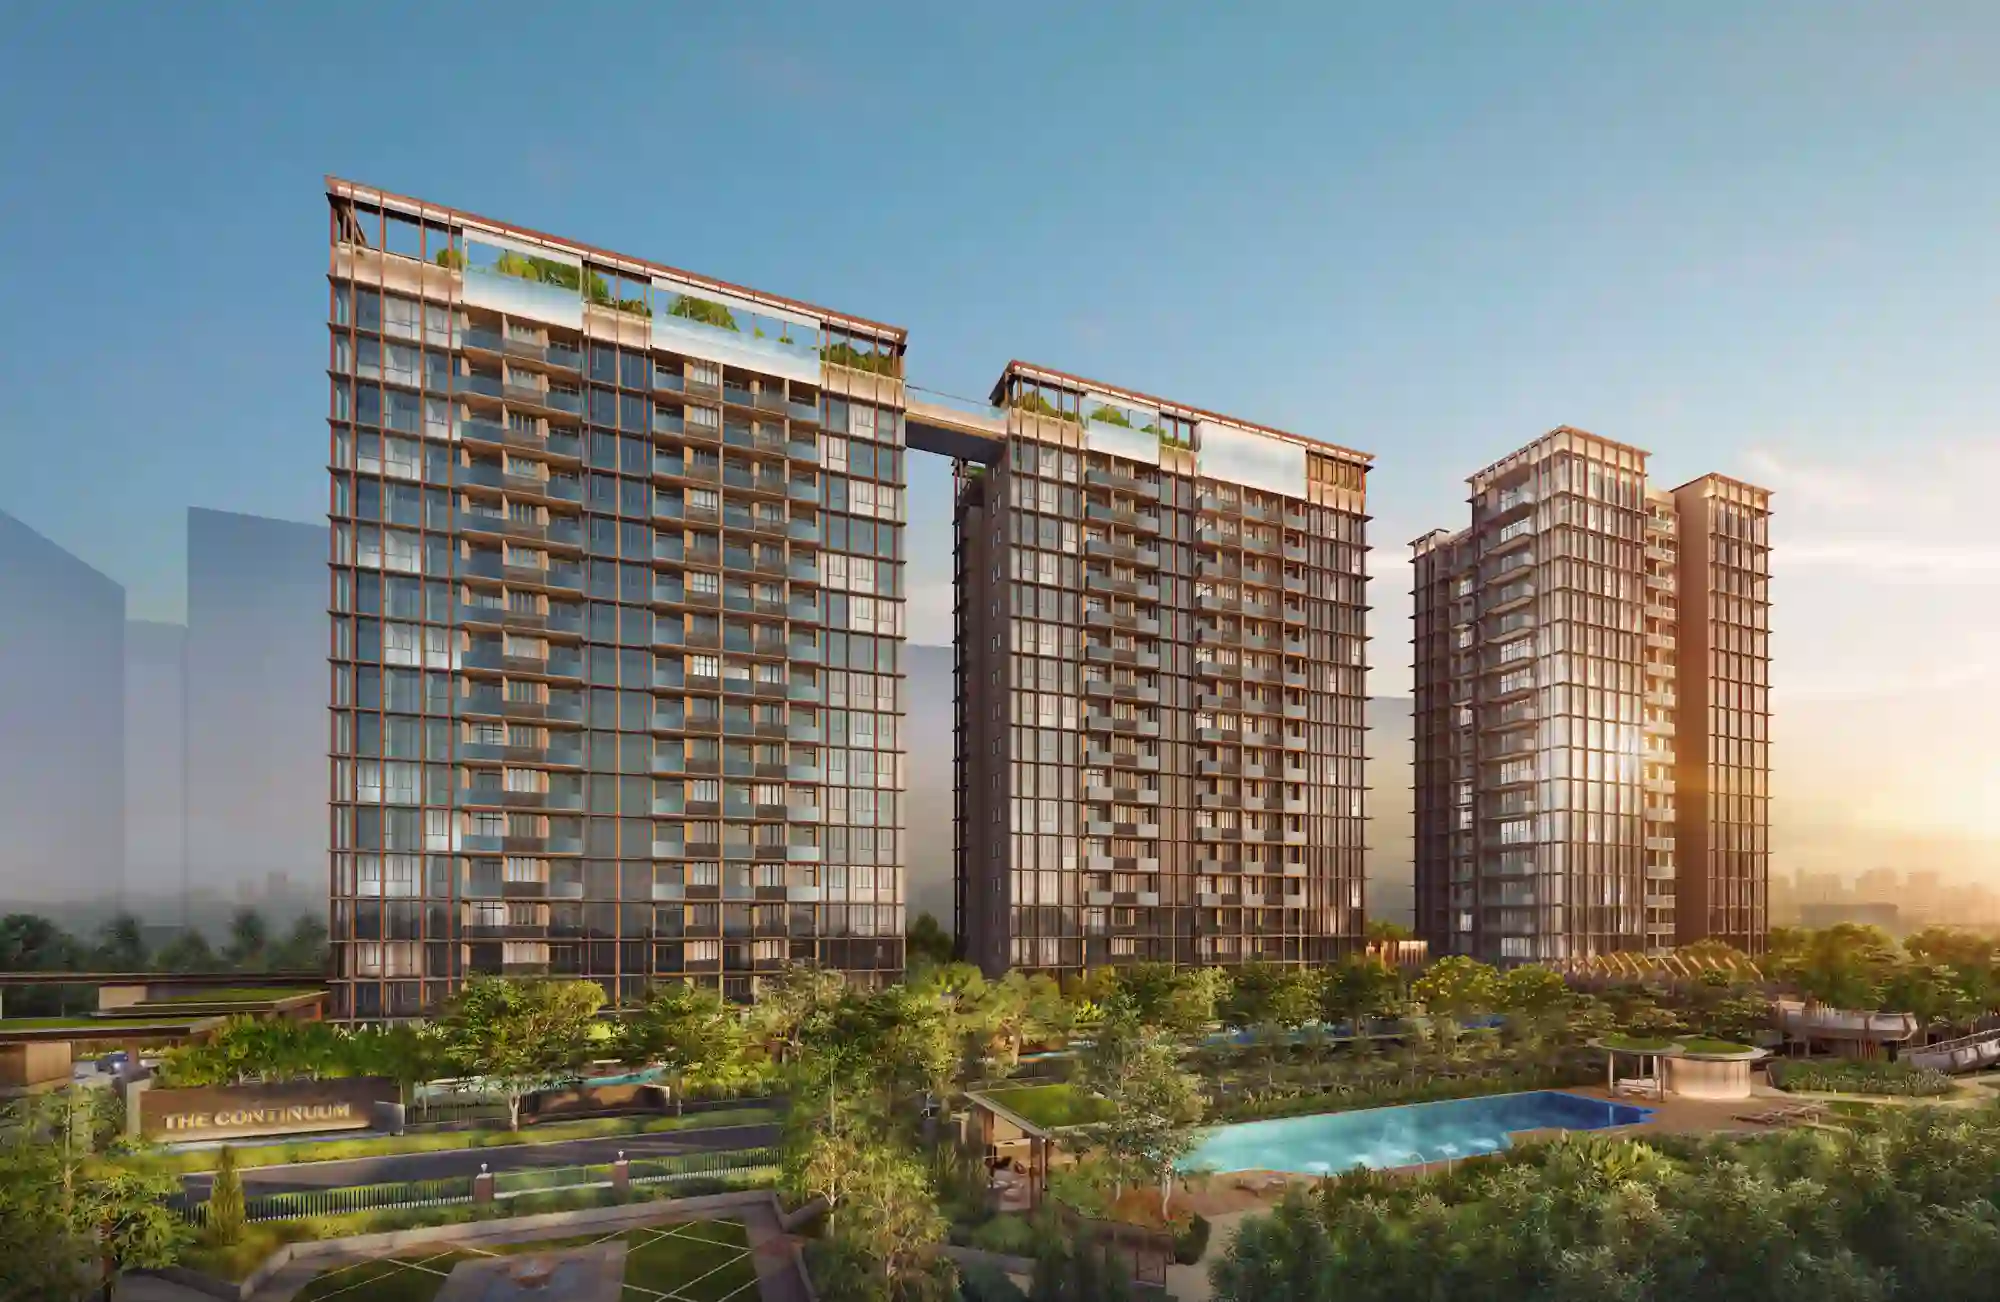 How to buy a New Launch Condo in Singapore